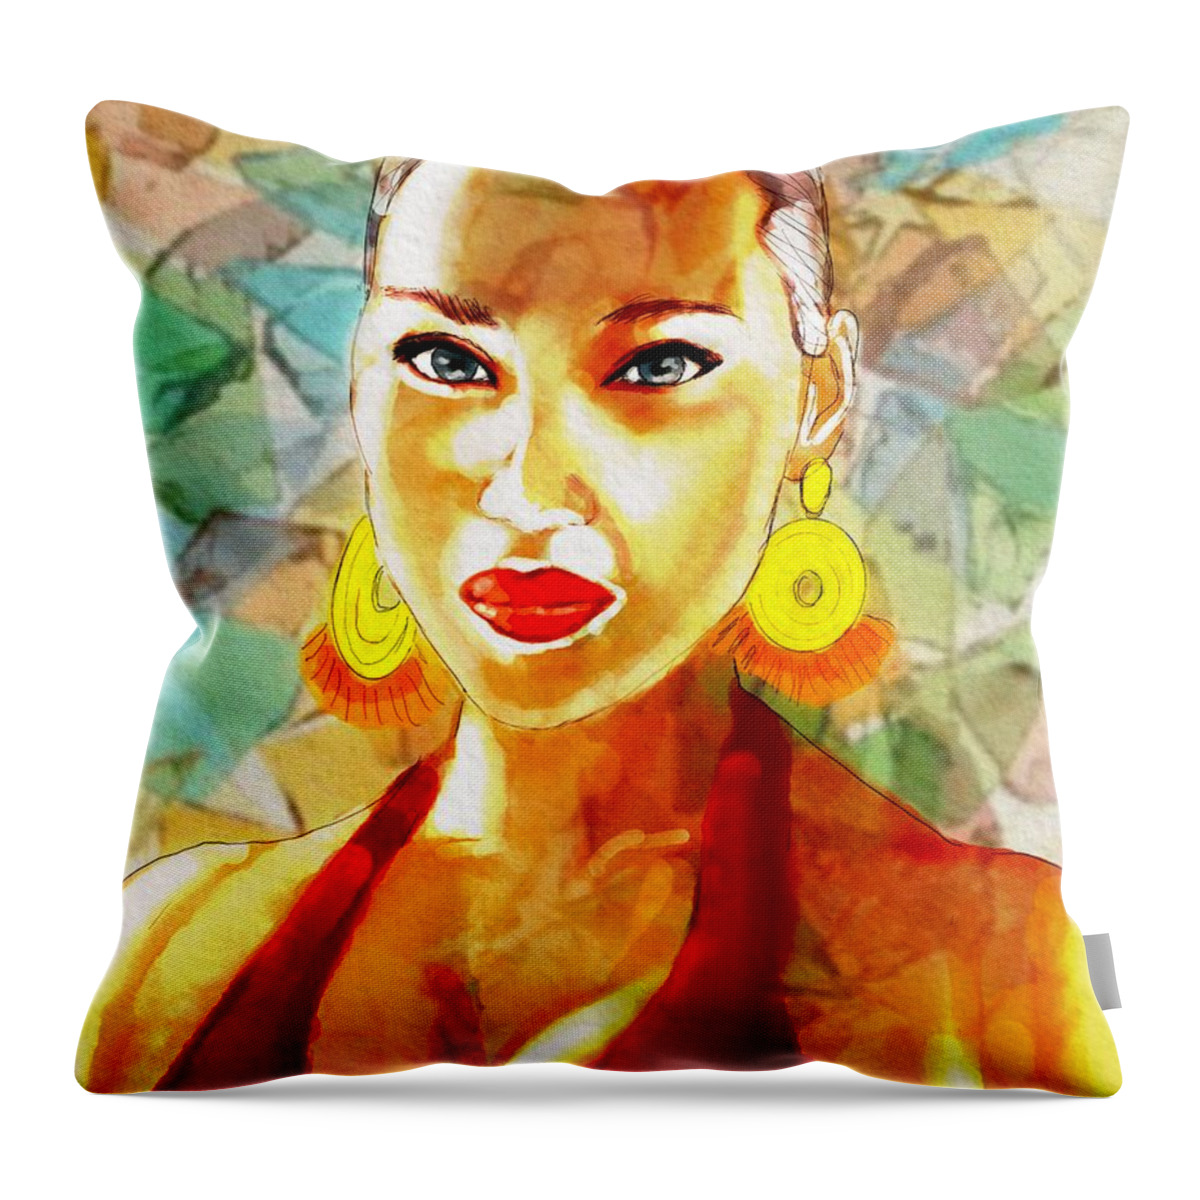 Portrait Throw Pillow featuring the digital art She Is The Sun by Michael Kallstrom